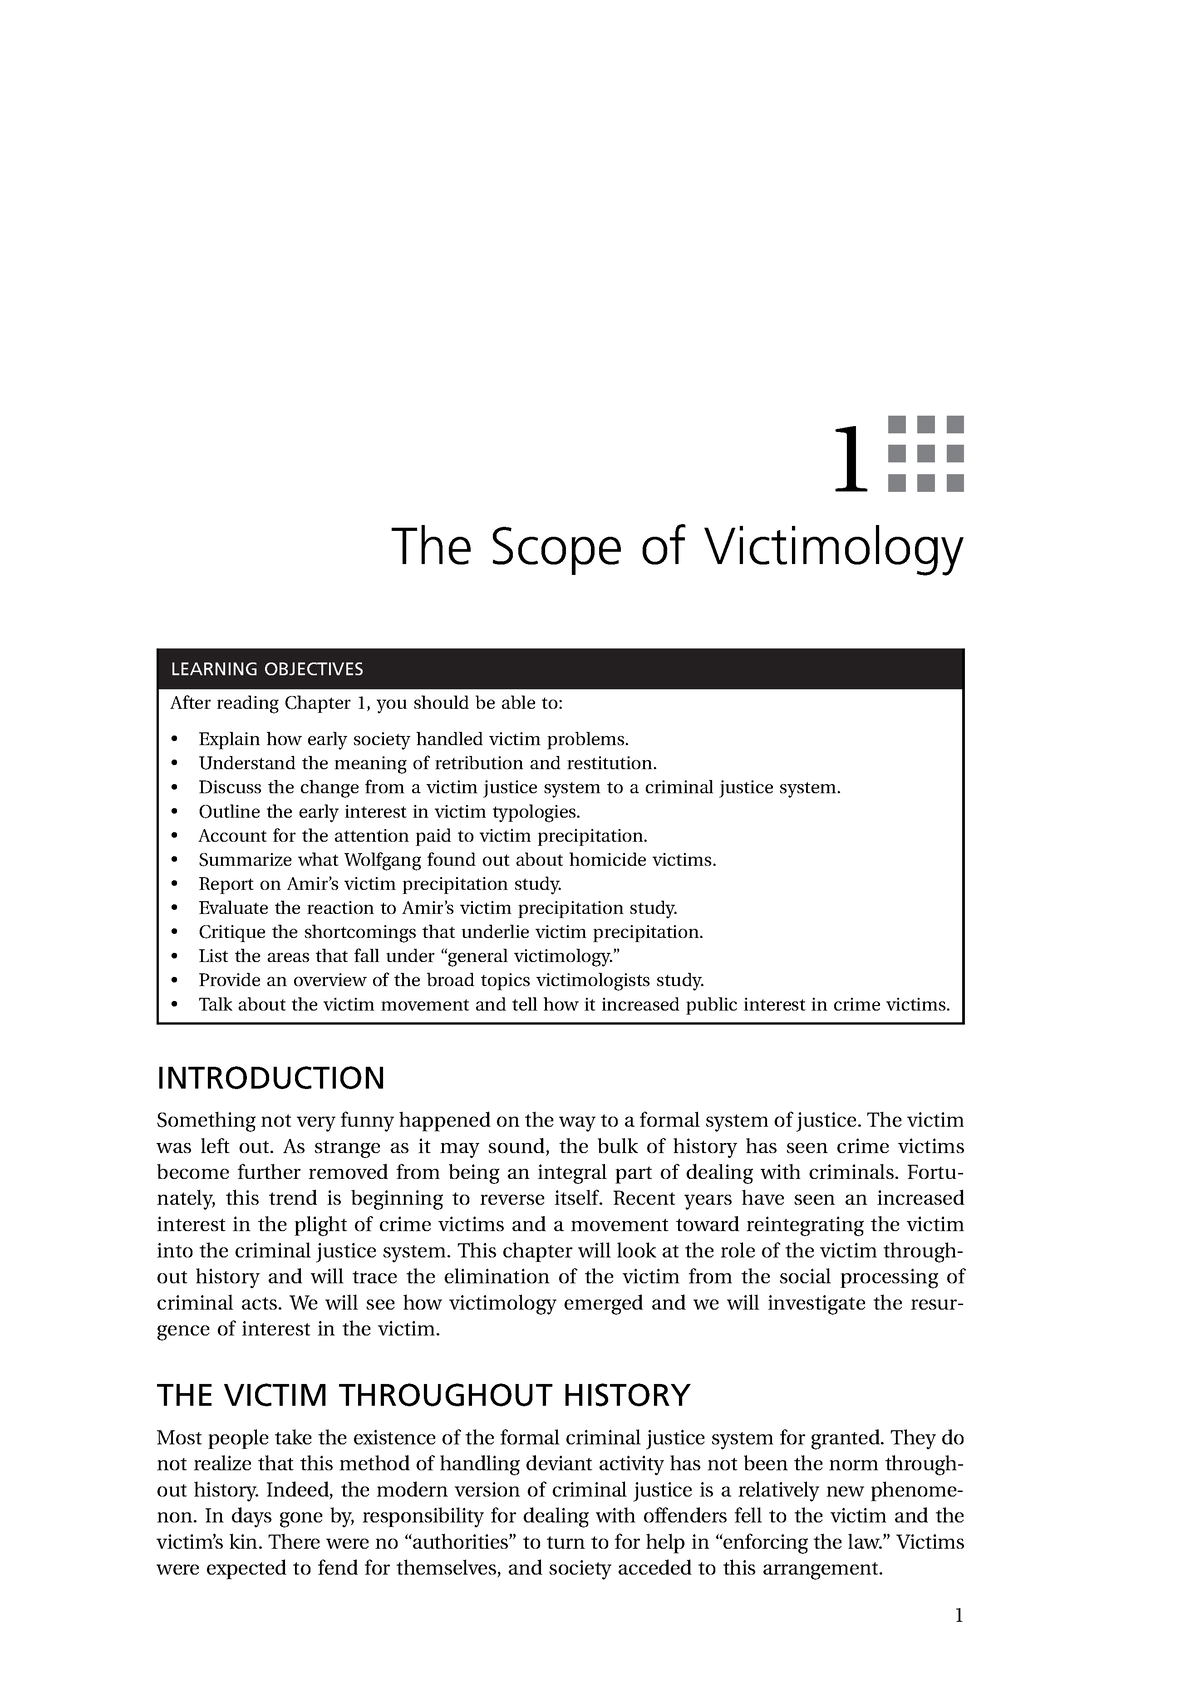 research paper topics for victimology